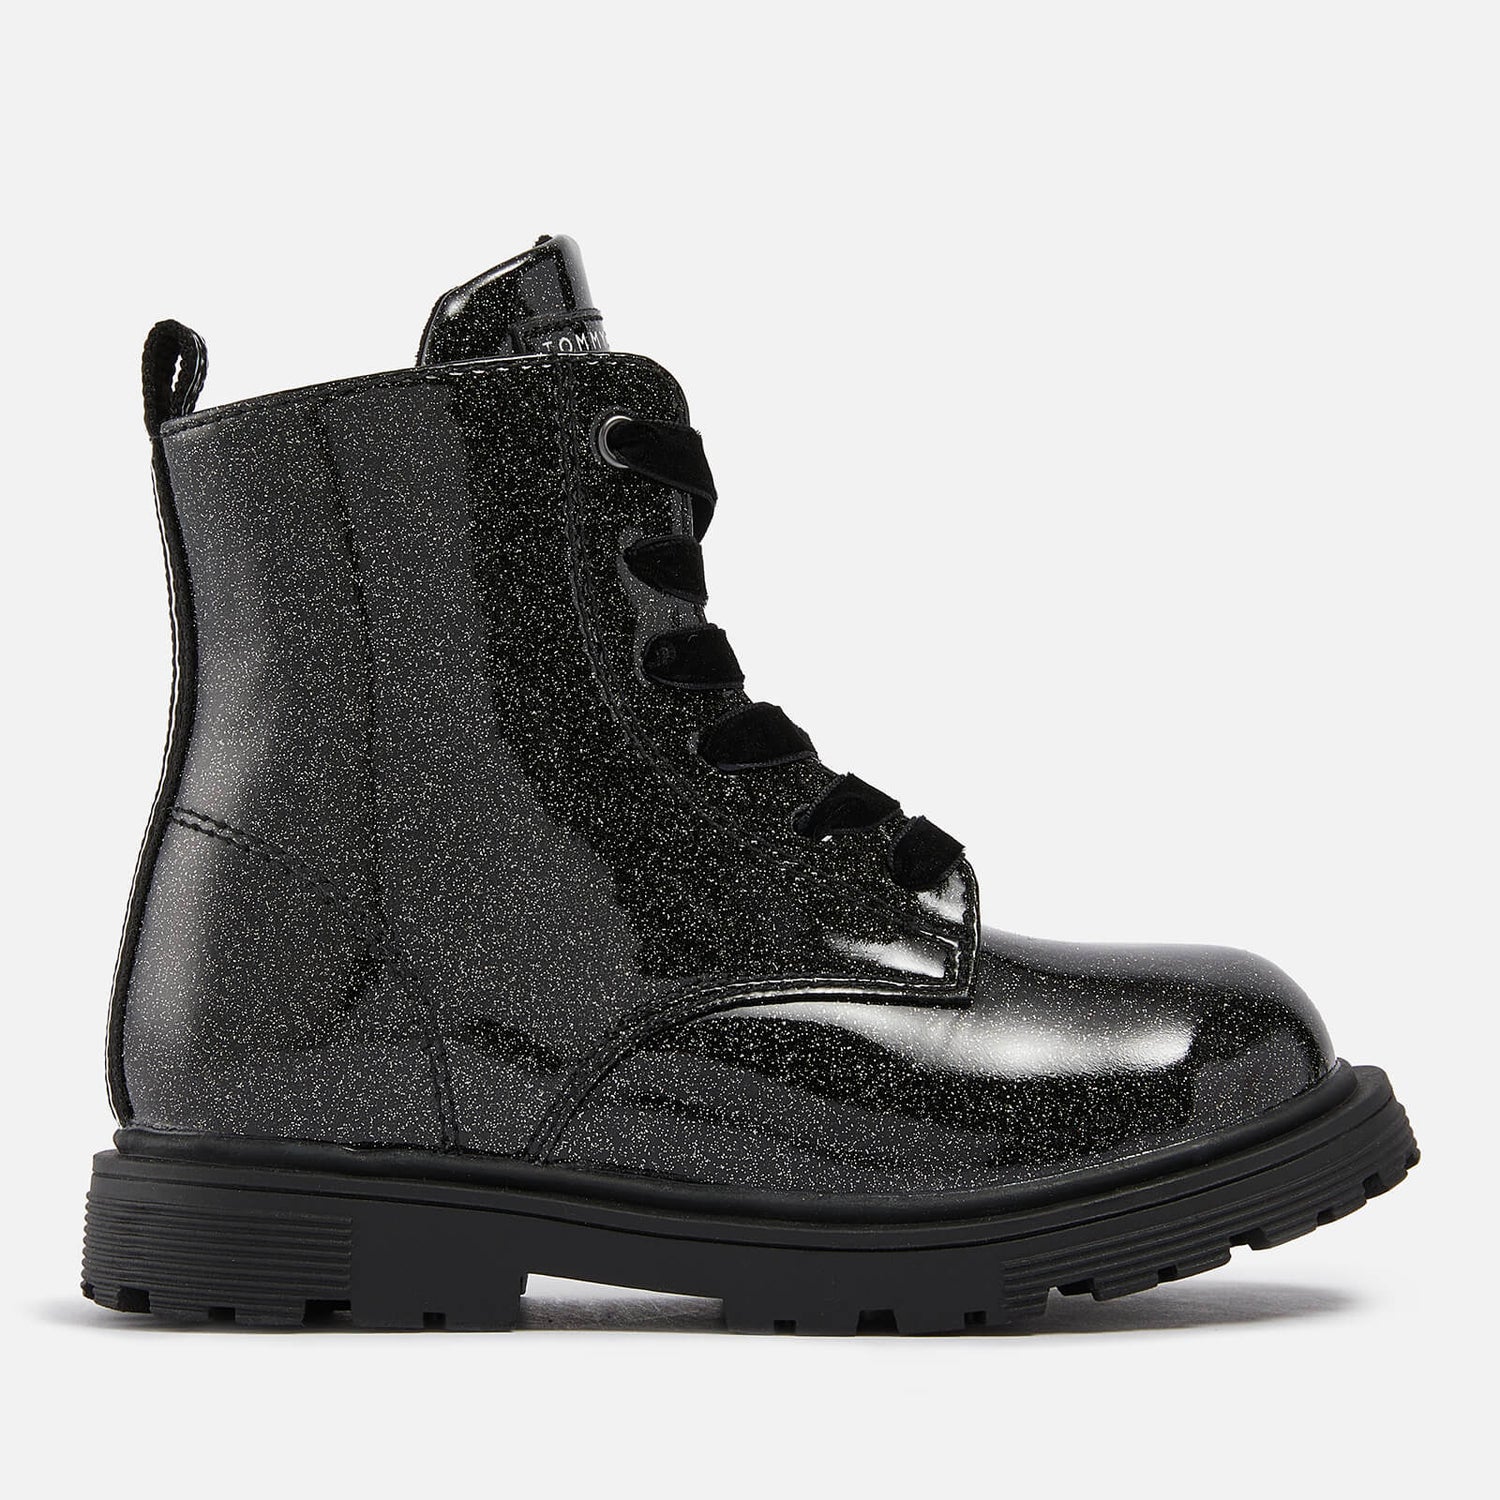 Tommy Hilfiger Girls' Glittered Rubber Ankle Boots